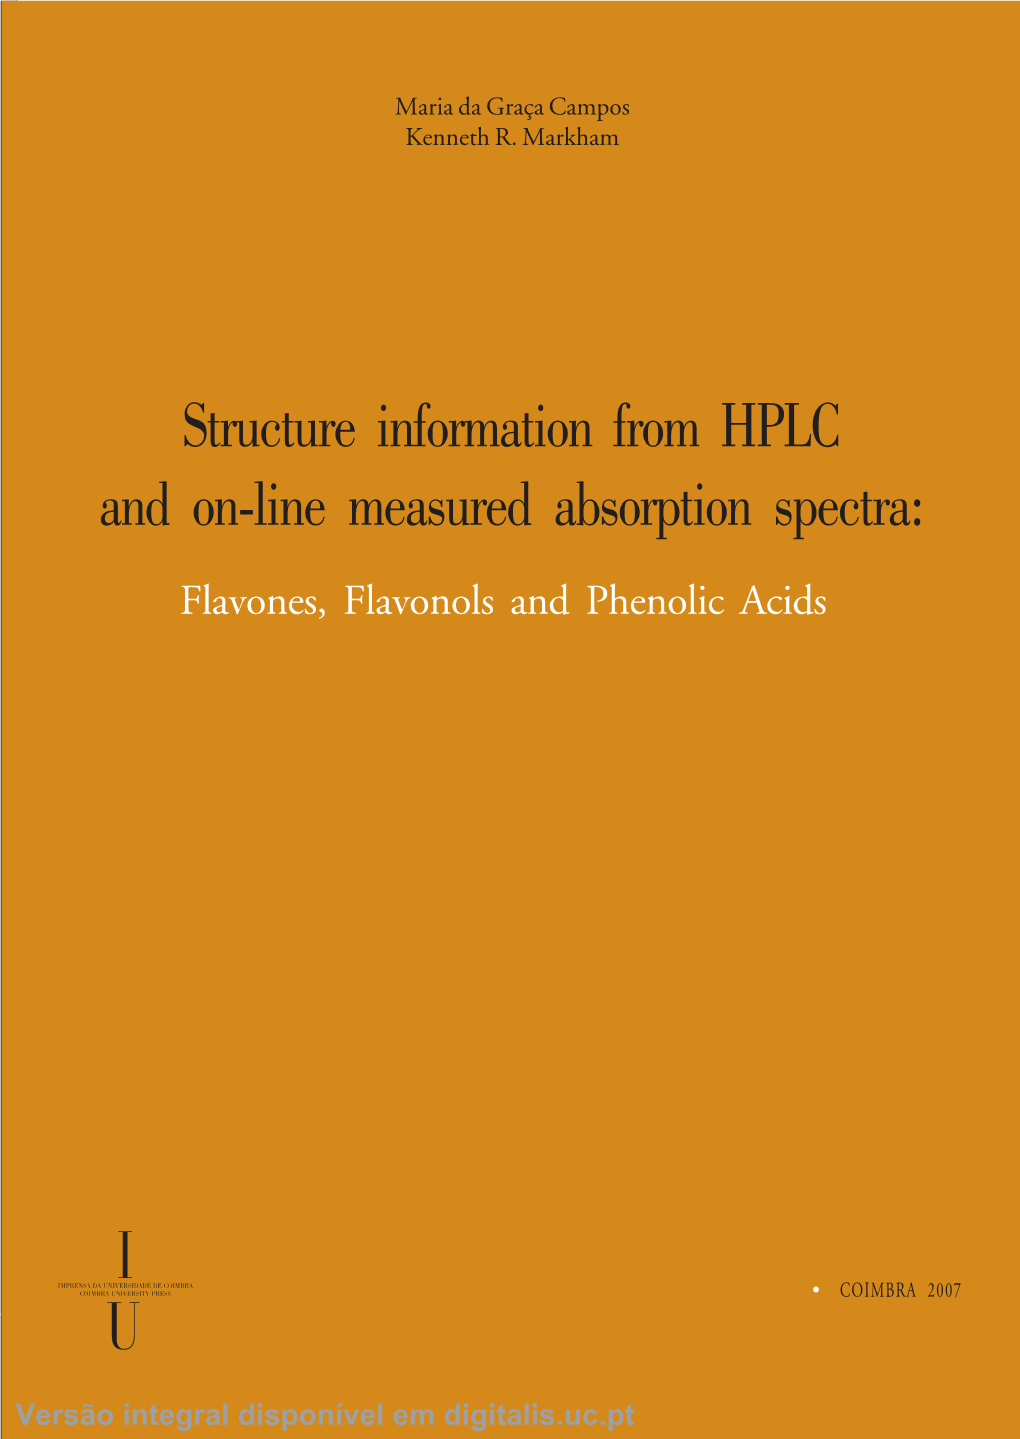 Structure Information from HPLC and On-Line Measured Absorption Spectra